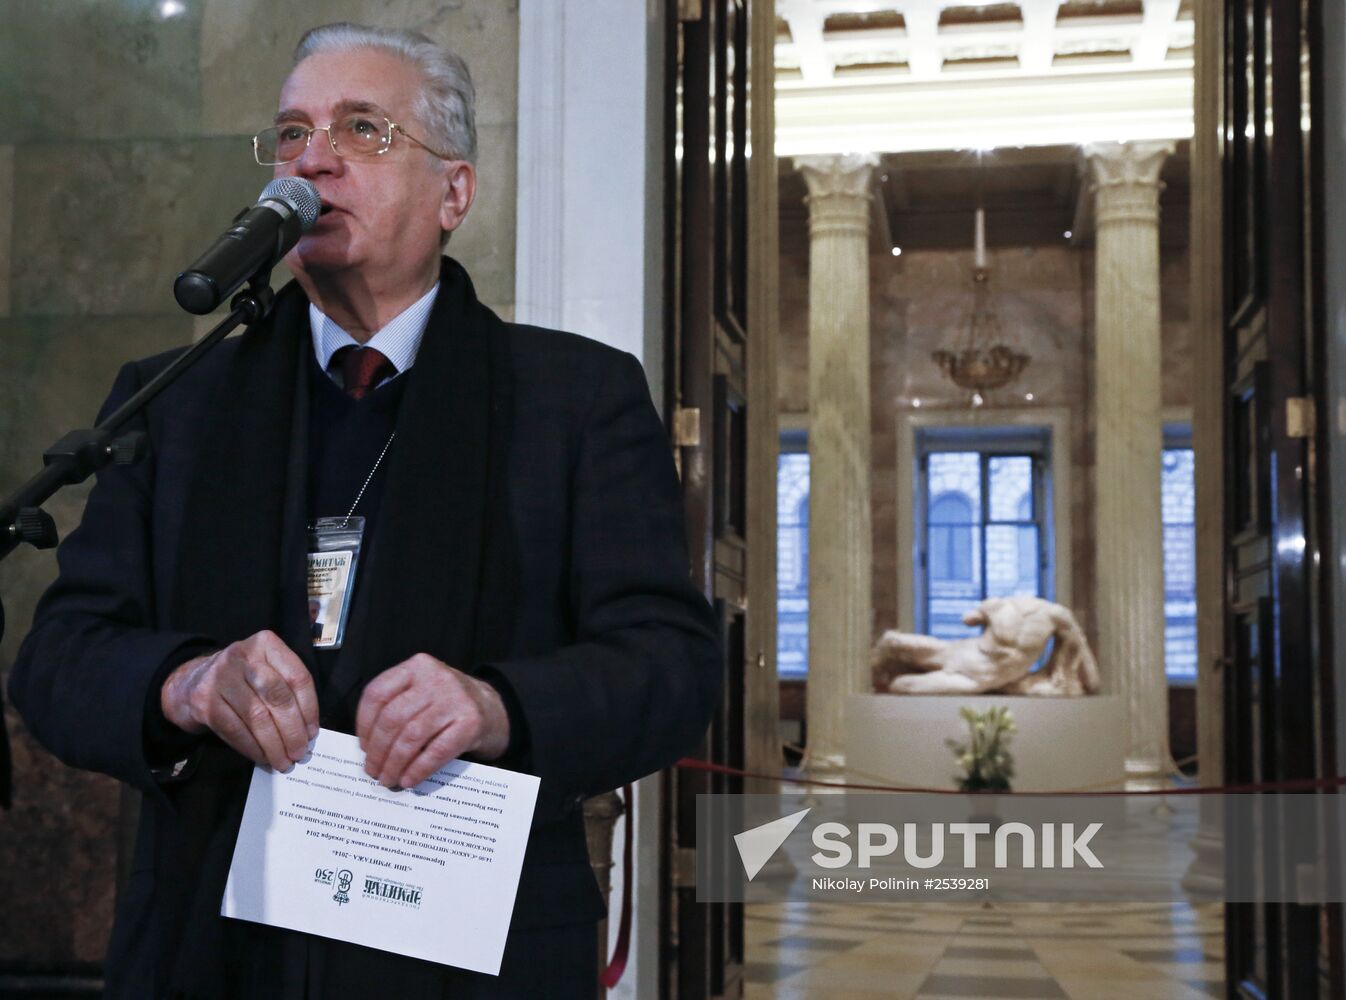 Statue of river god Ilissos from Parthenon is displayed at Hermitage for first time